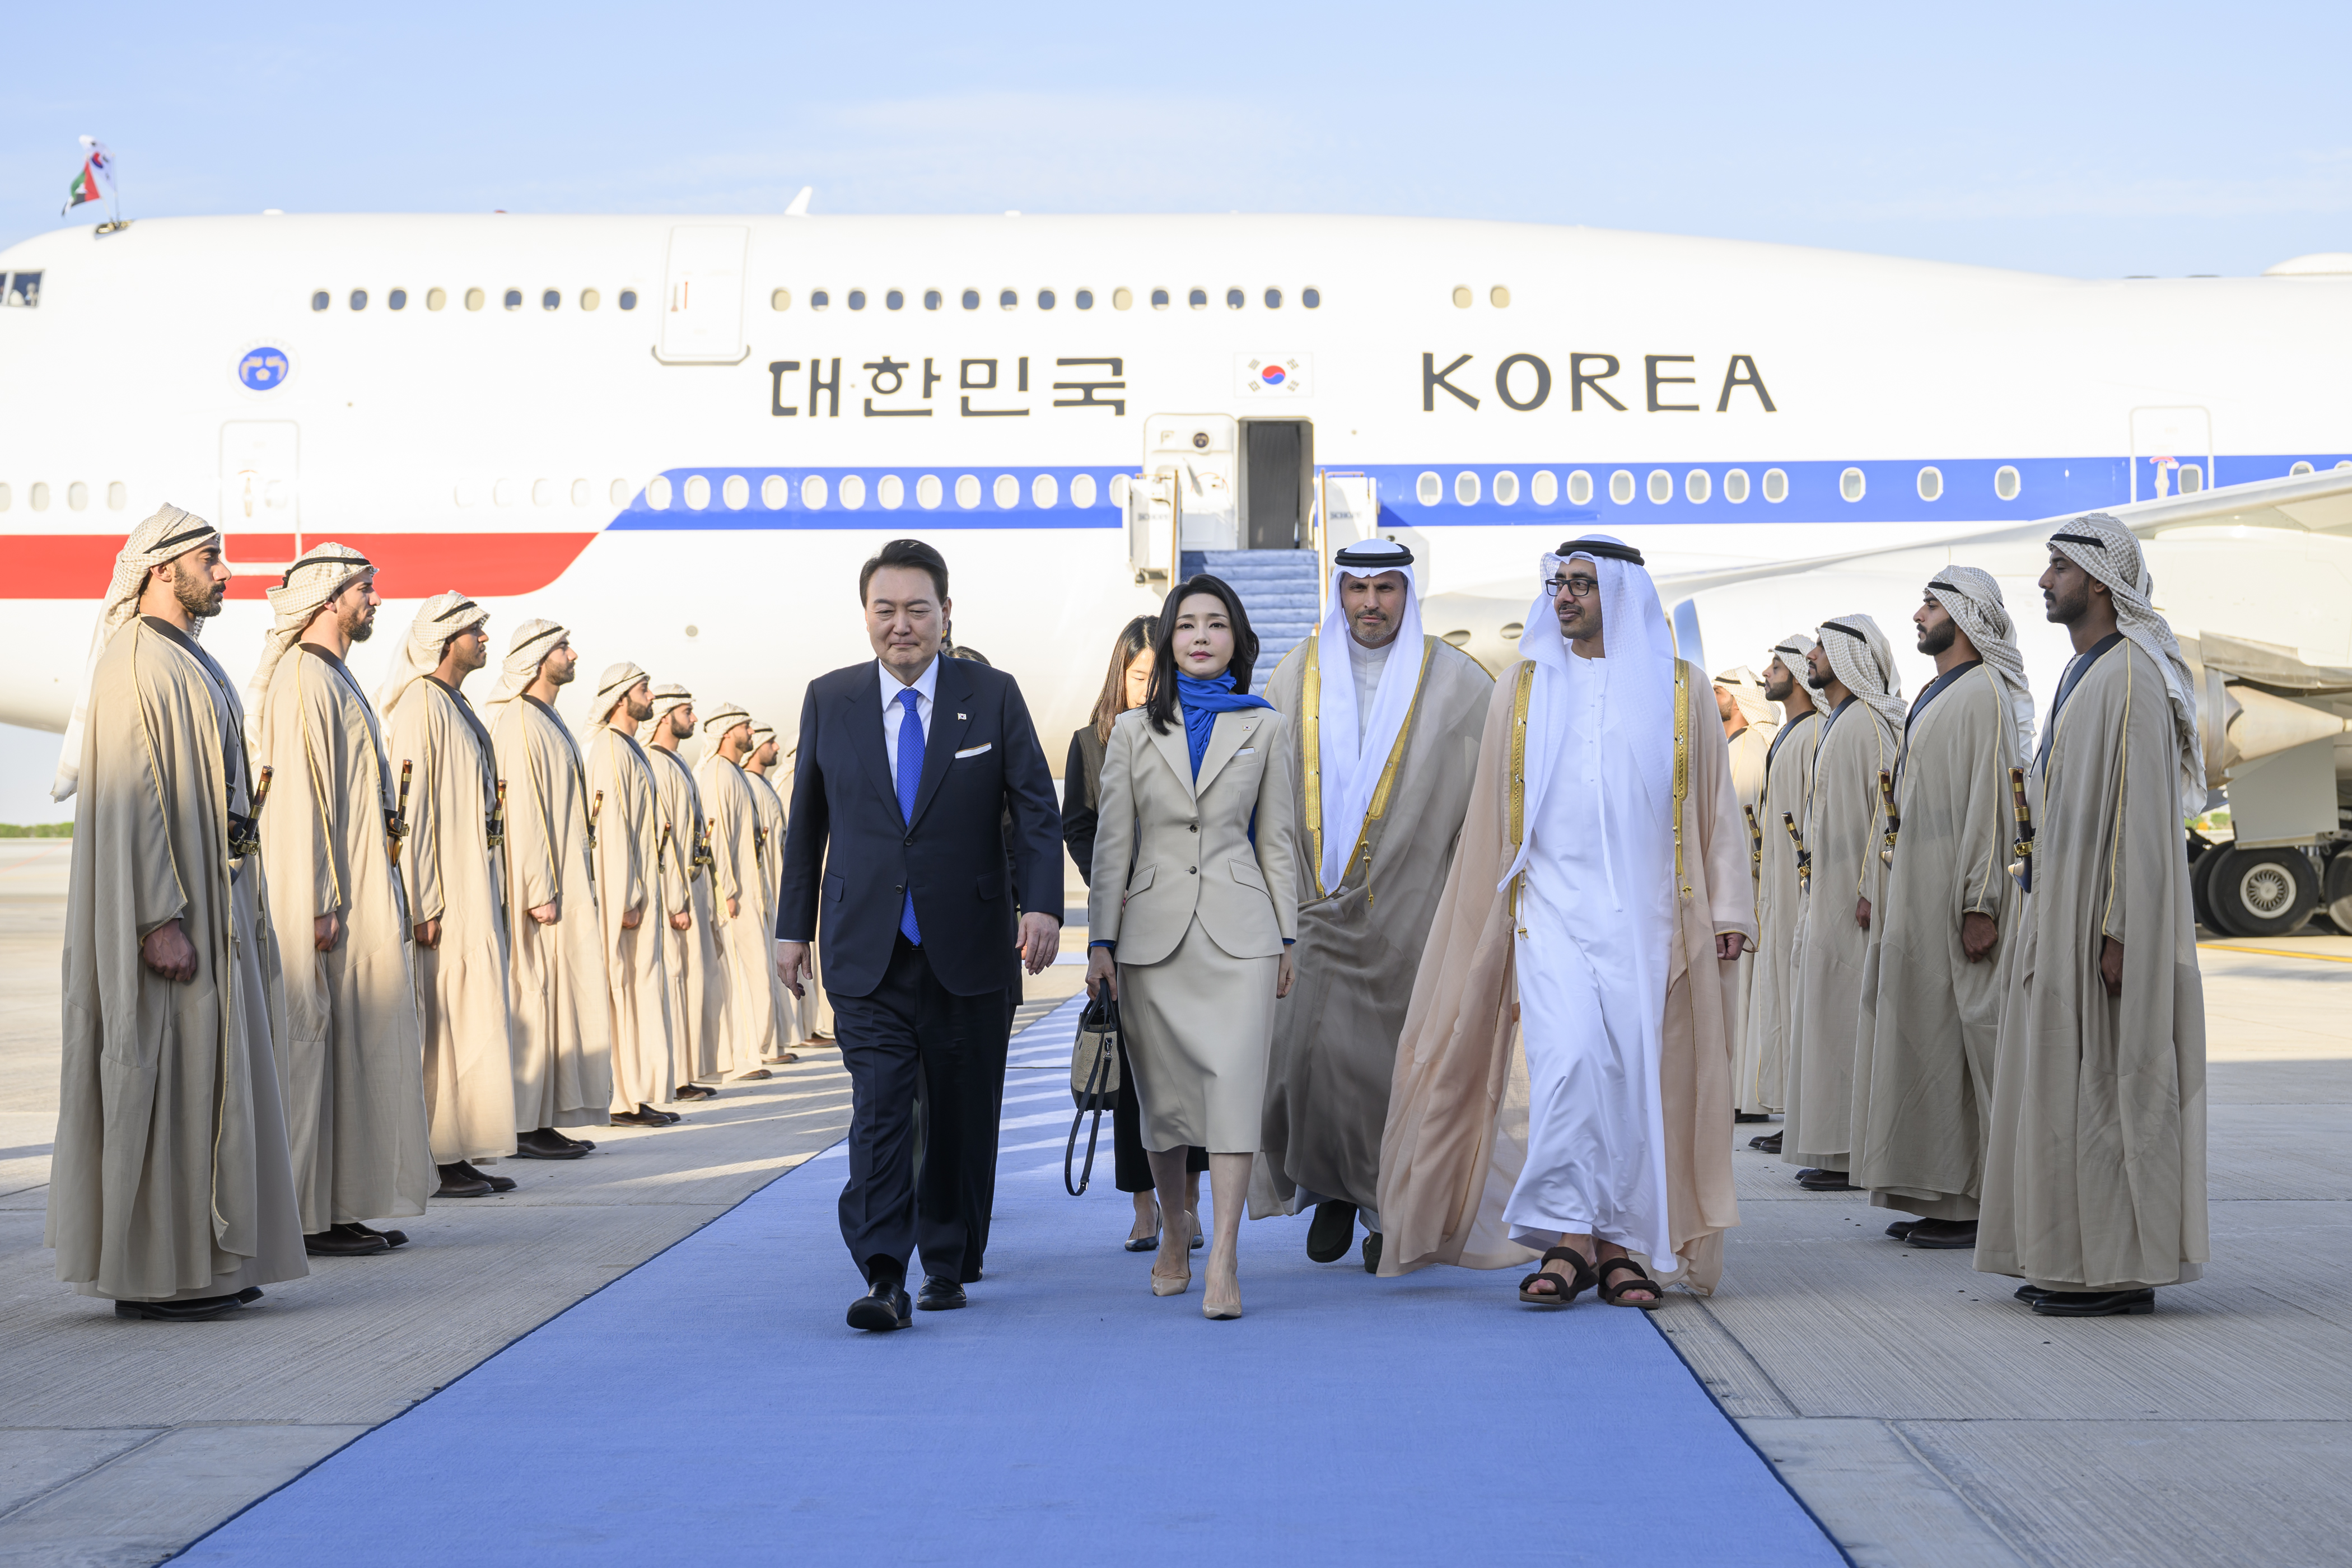 23rd May, 2023. First lady to promote Visit Korea Year campaign First lady  Kim Keon Hee (R) poses for a photo with Lee Boo-jin, head of Hotel Shilla  and chairperson of the